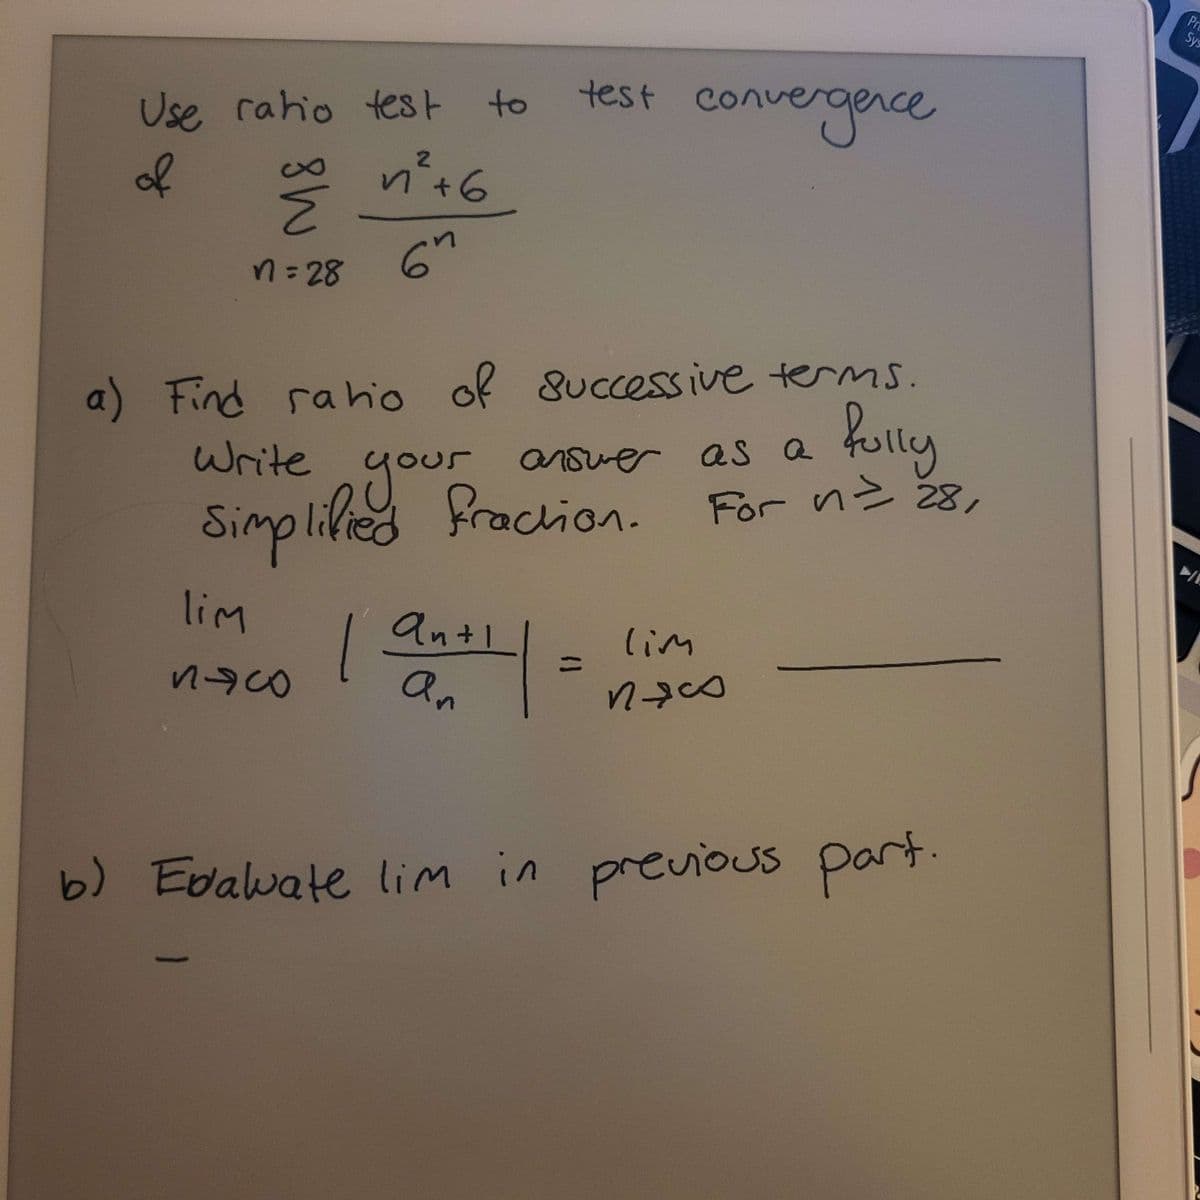 Use ratio test to
of
n² +6
Ž
n=28
6n
lim
Buco
9
test convergence
a) Find ratio of successive terms.
Write
as a fully
your
Simplified Praction.
For n = 28,
| |
anti
an
answer as a
lim
пясо
b) Evaluvate lim in previous part.
Pre
Sys
/